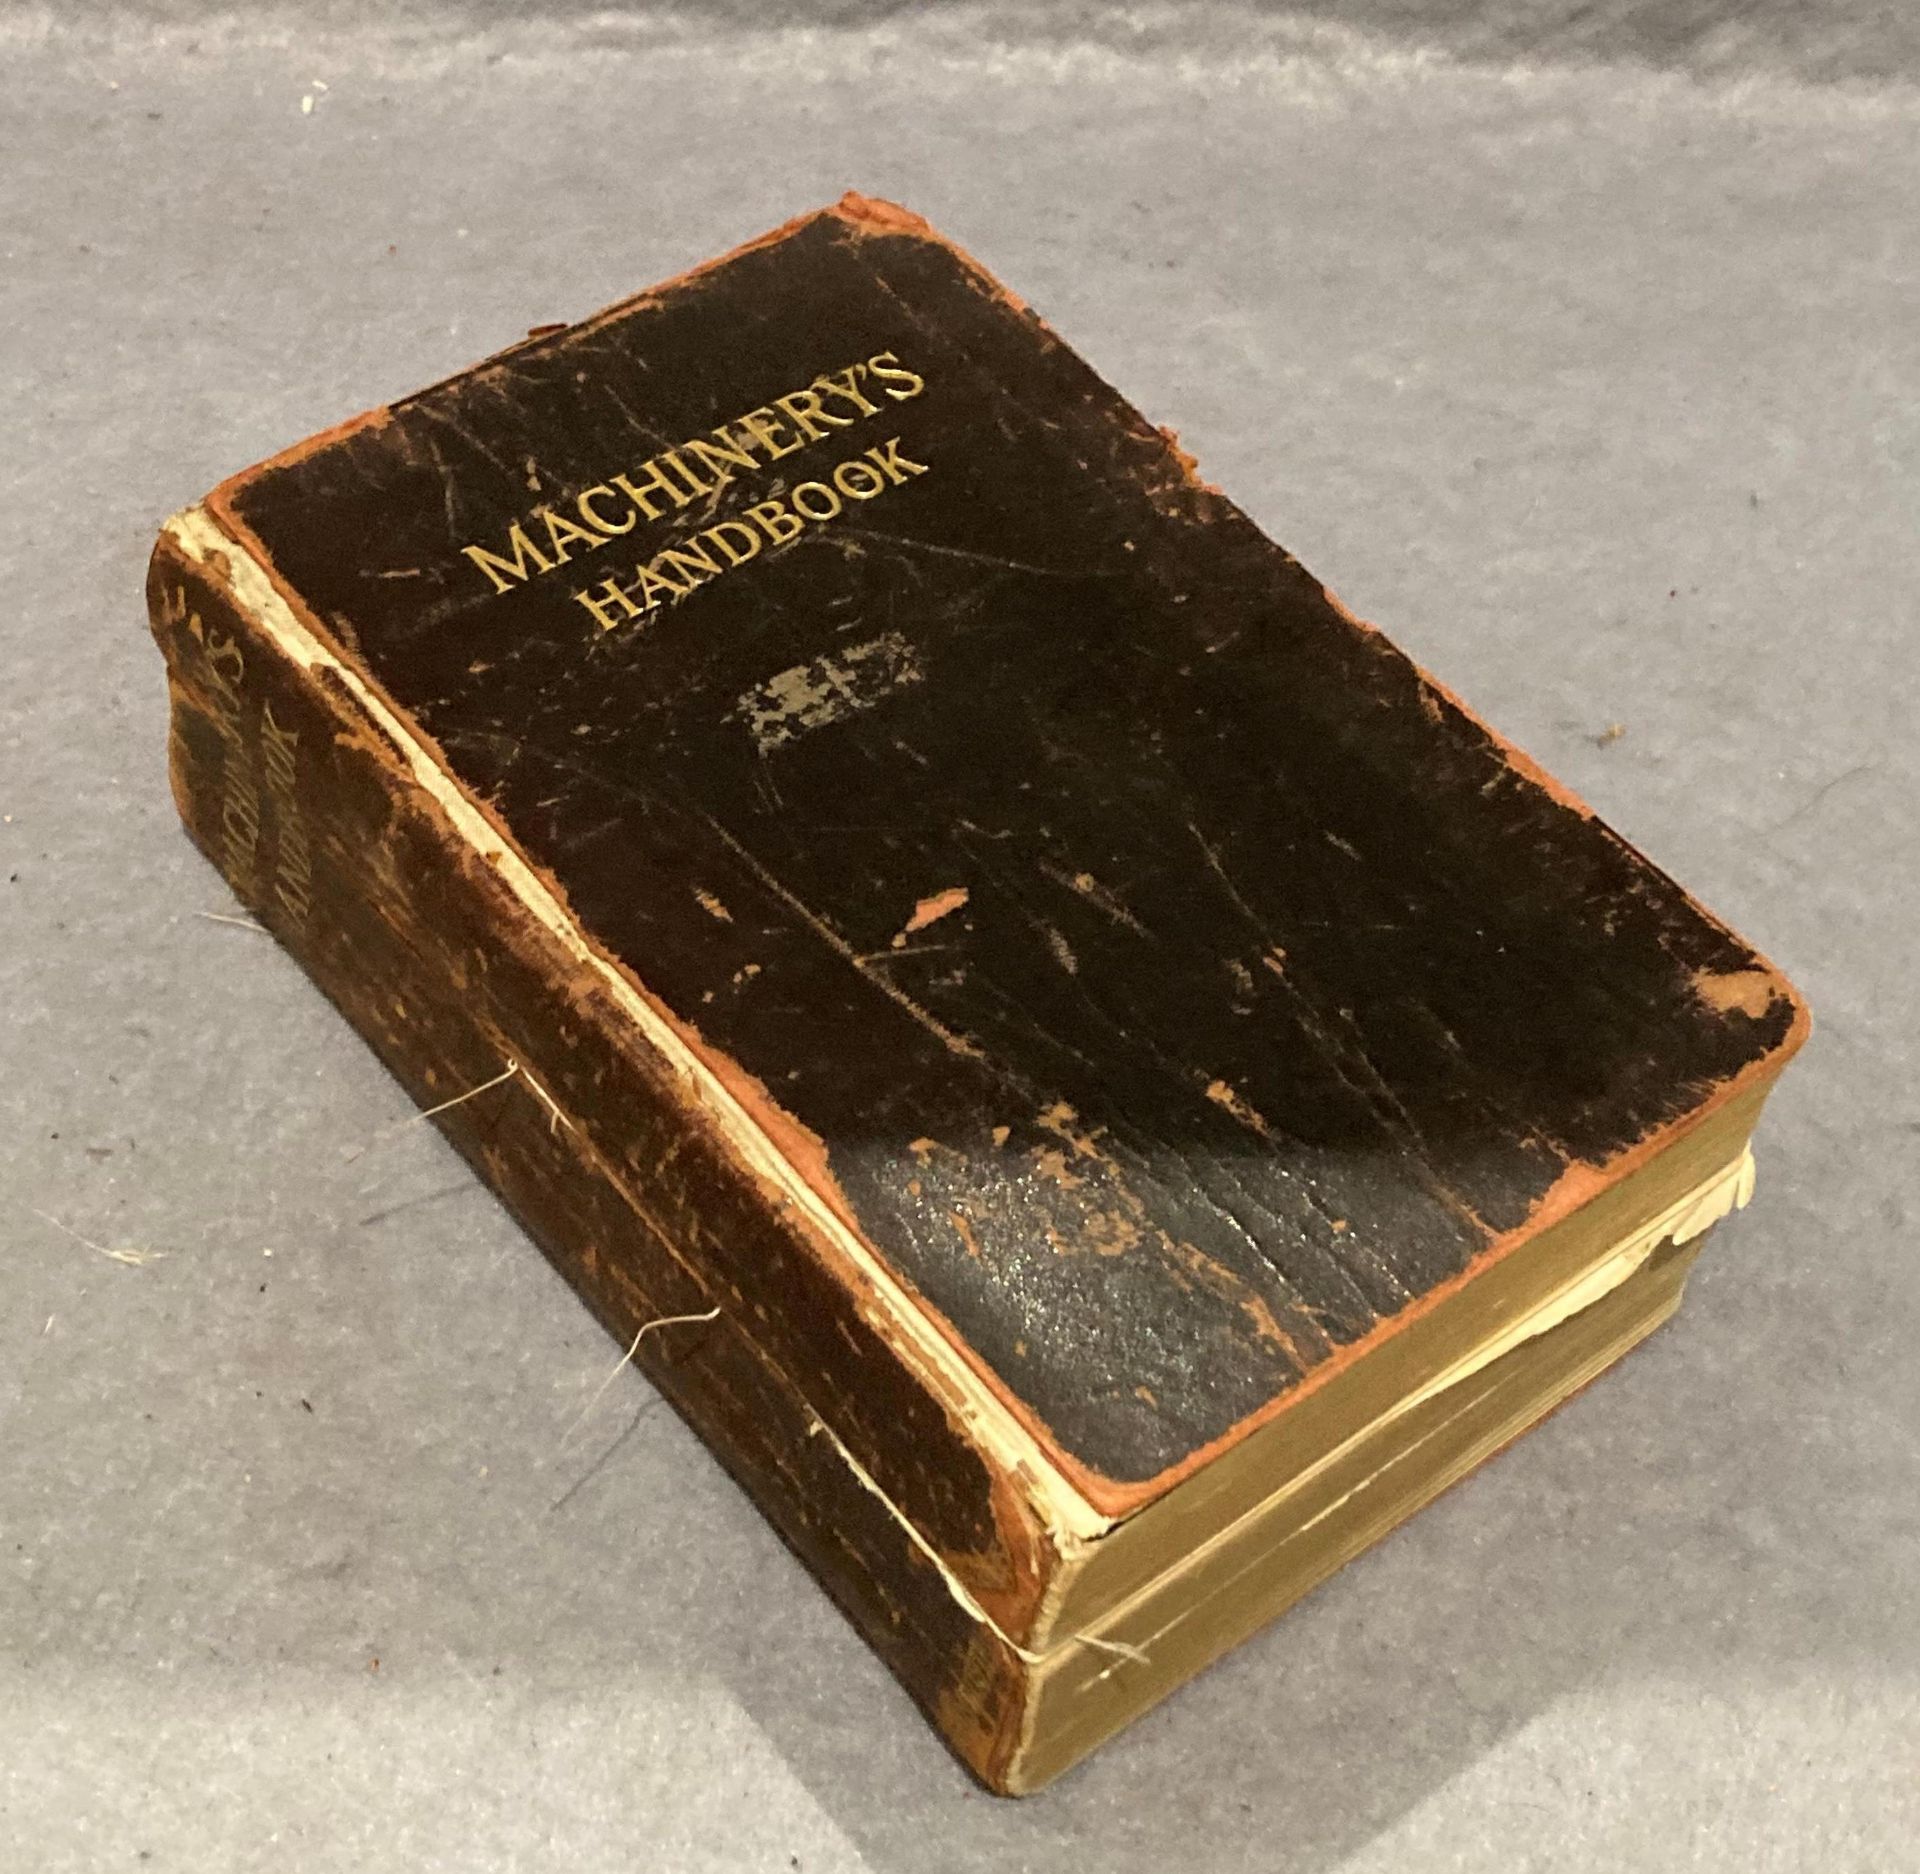 Machinery's Handbook, 1914 first edition, published in New York by the Industrial Press, quite rare,